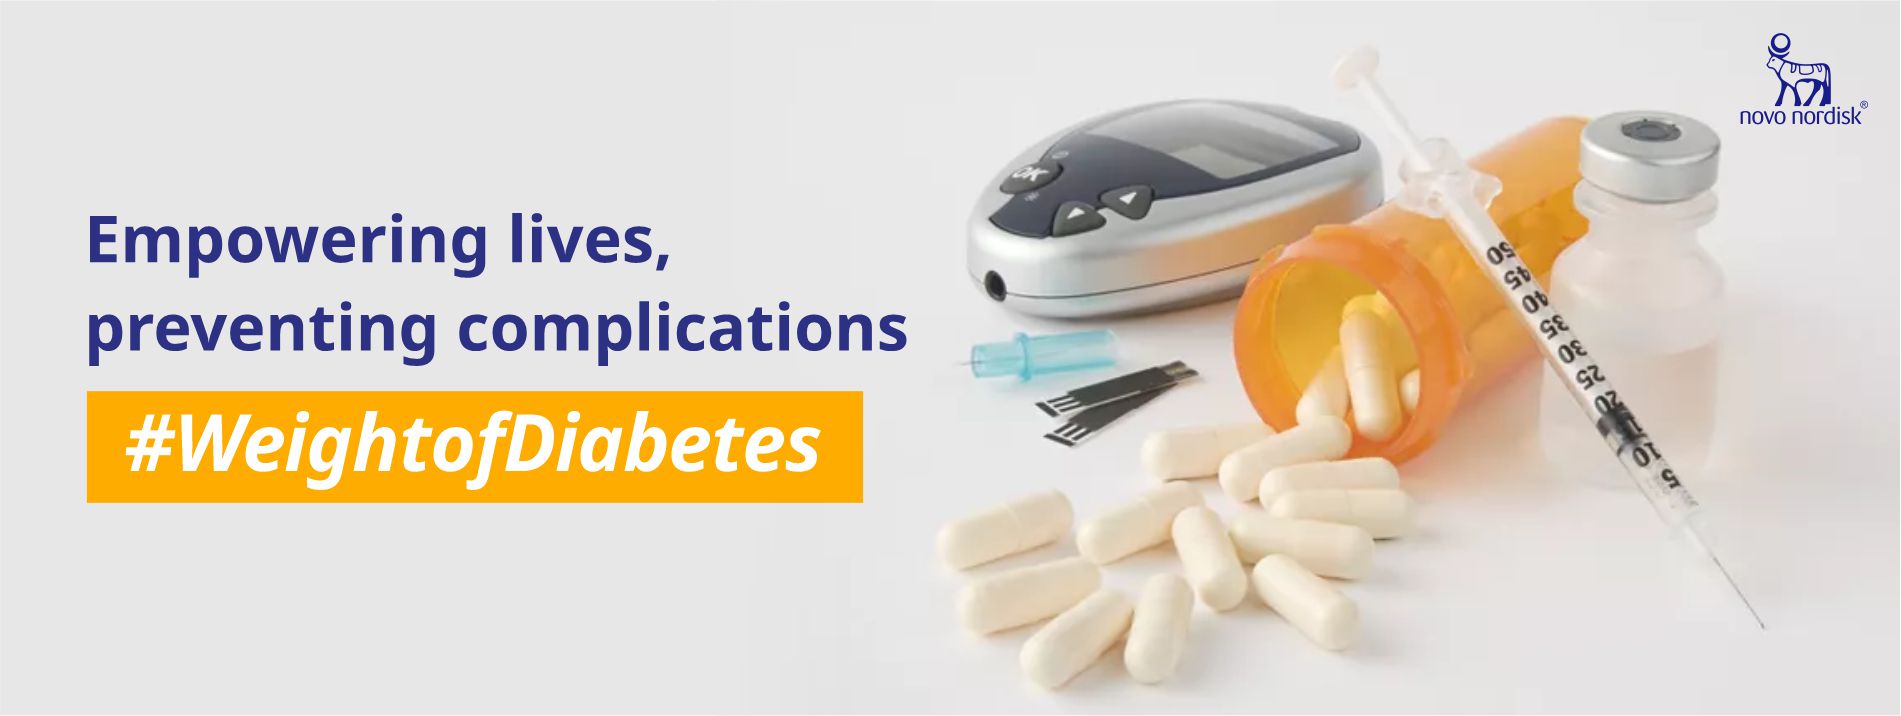 Consult a healthcare provider if you spot warning signs of diabetes symptoms, as newer possibilities in diabetes management may offer effective solutions.